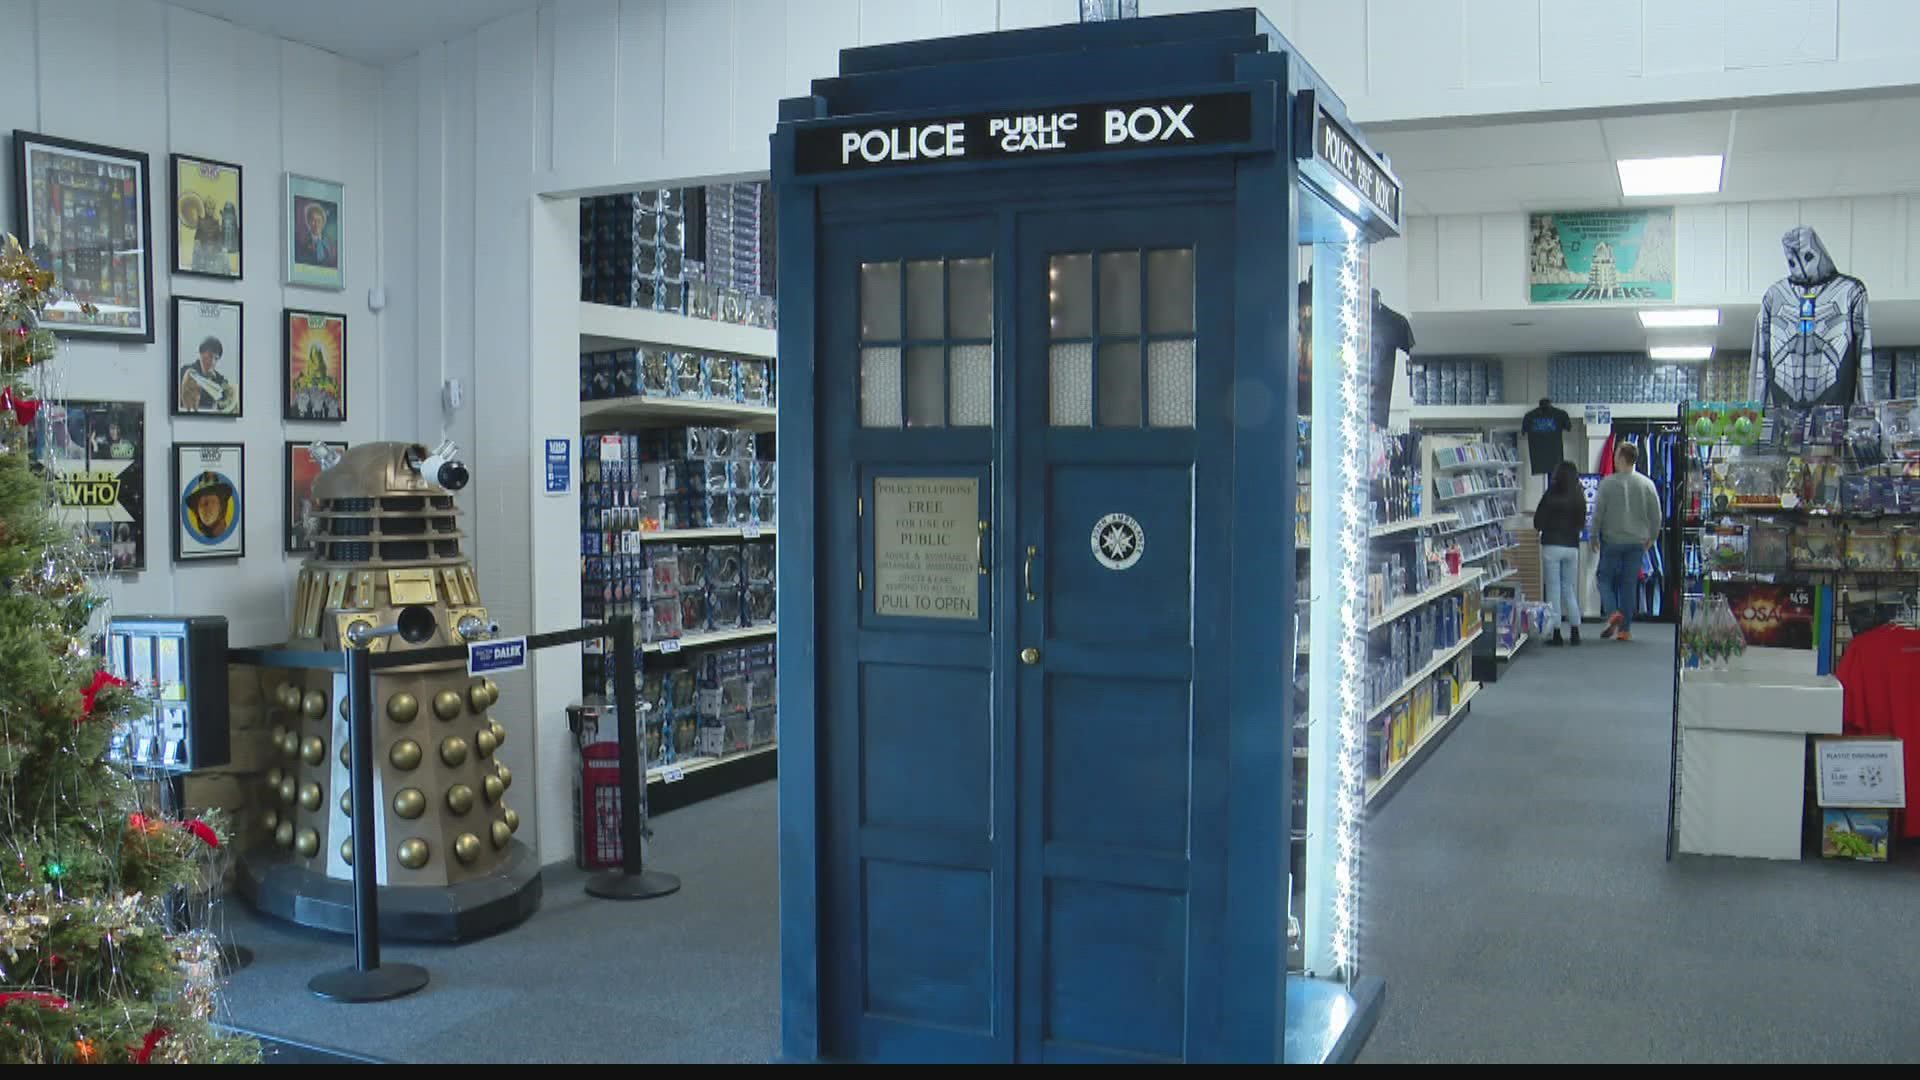 Dr. Who North America prides itself on having more memorabilia than any other store in the United States.